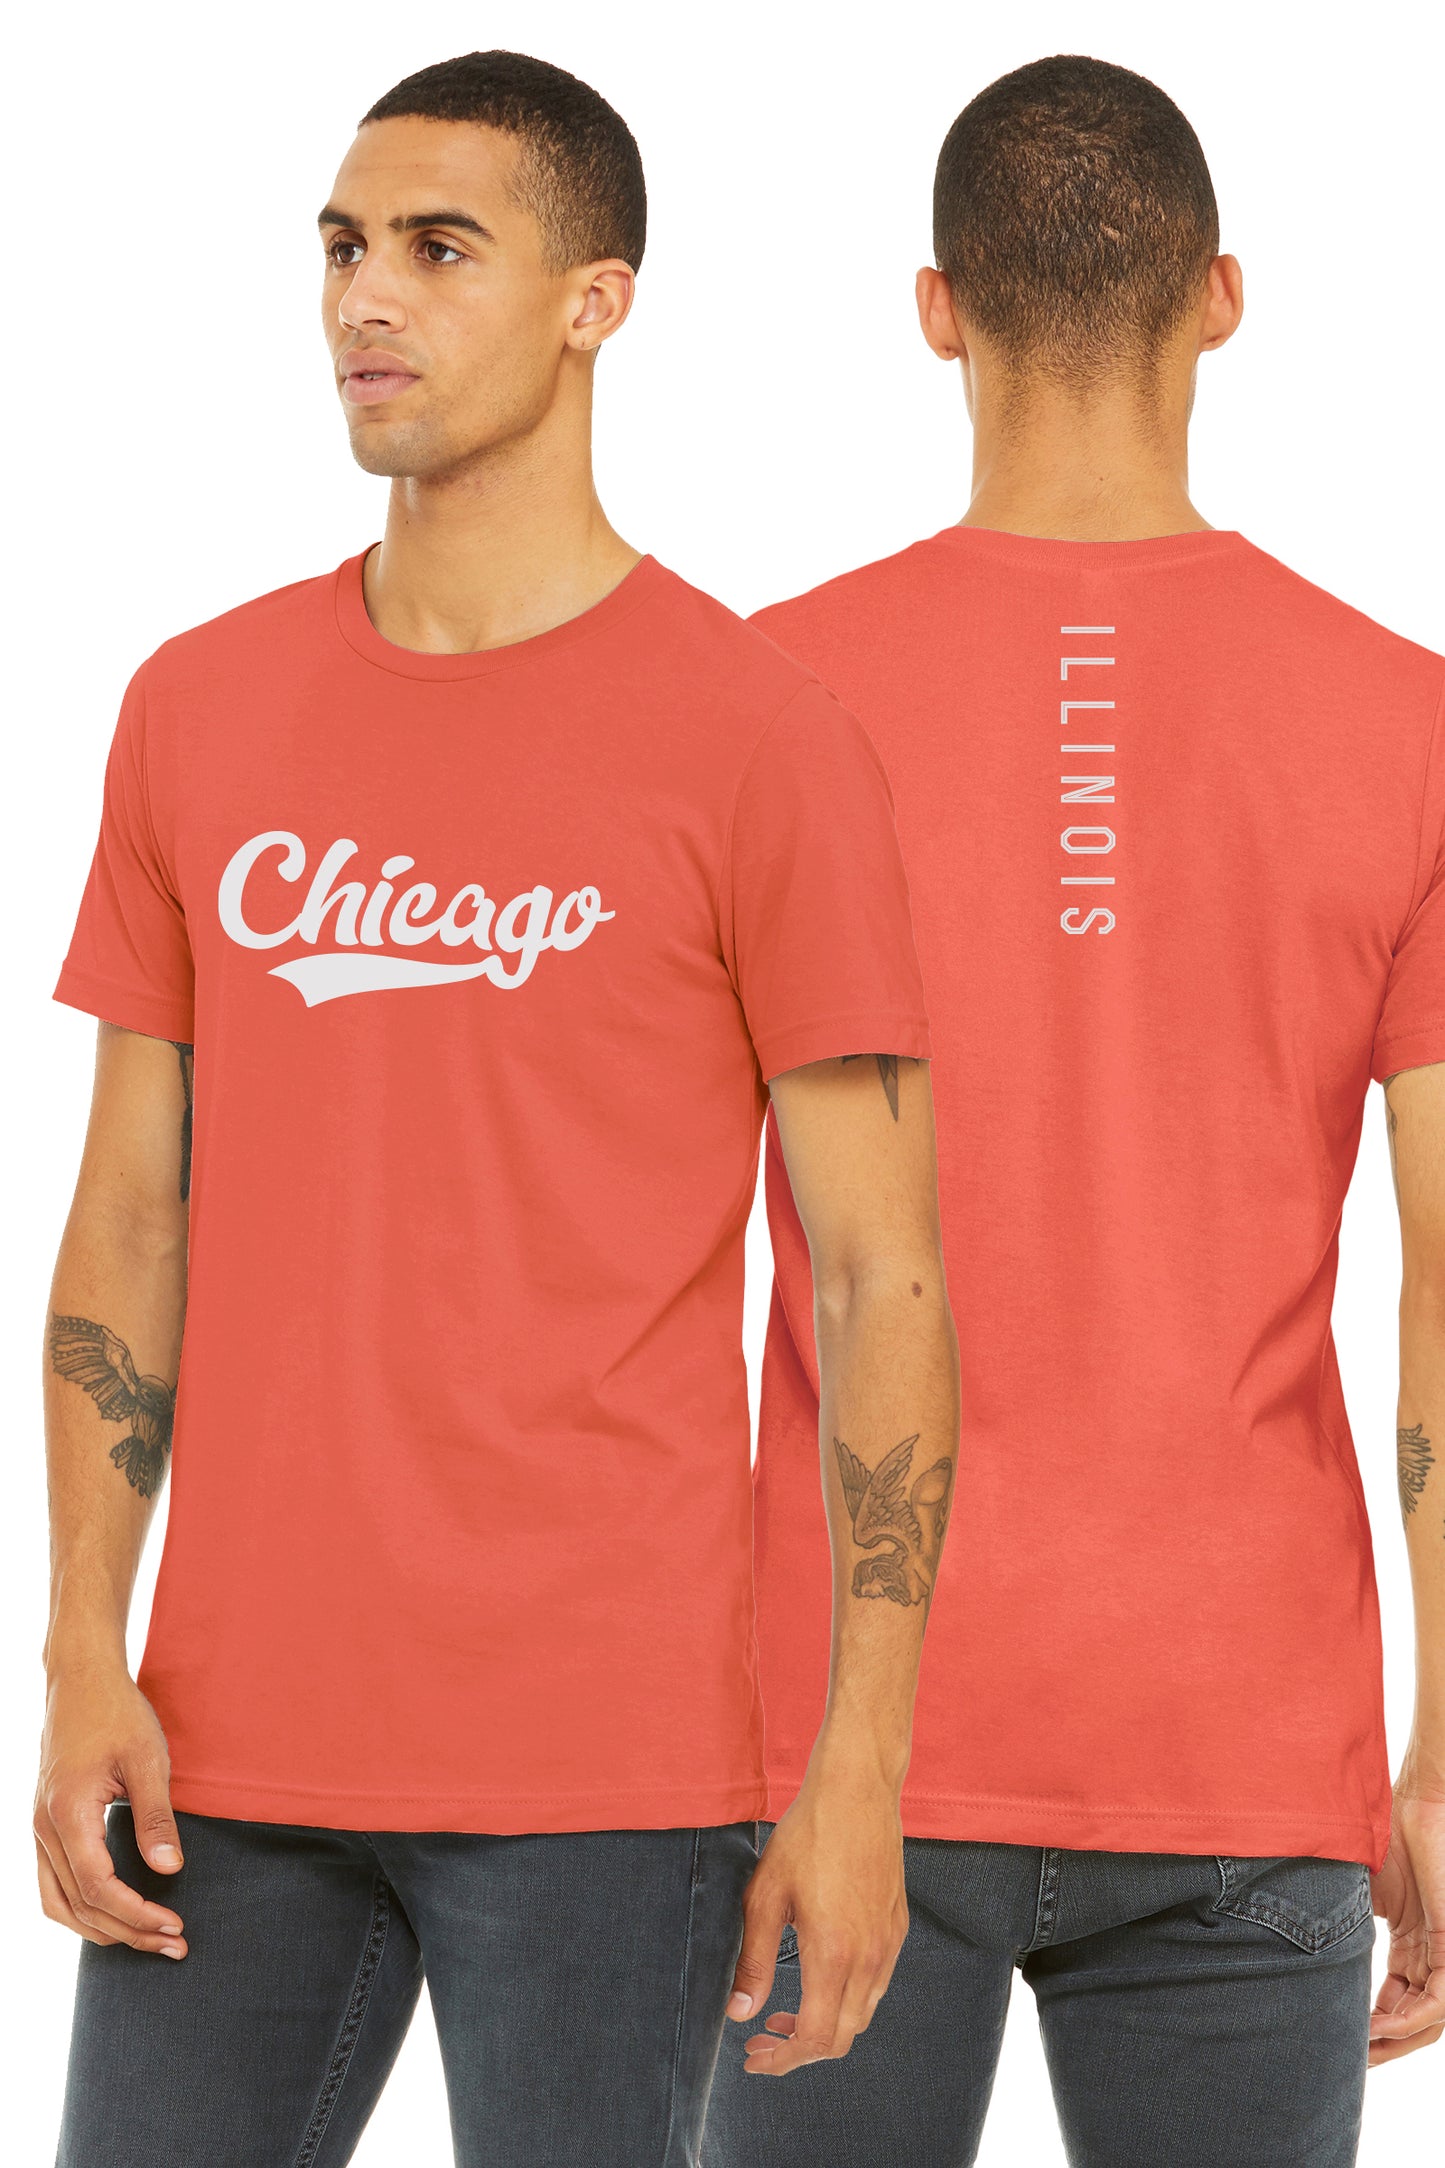 Daxton Adult Unisex Tshirt Chicago Script with Illinois Vertical on the Back